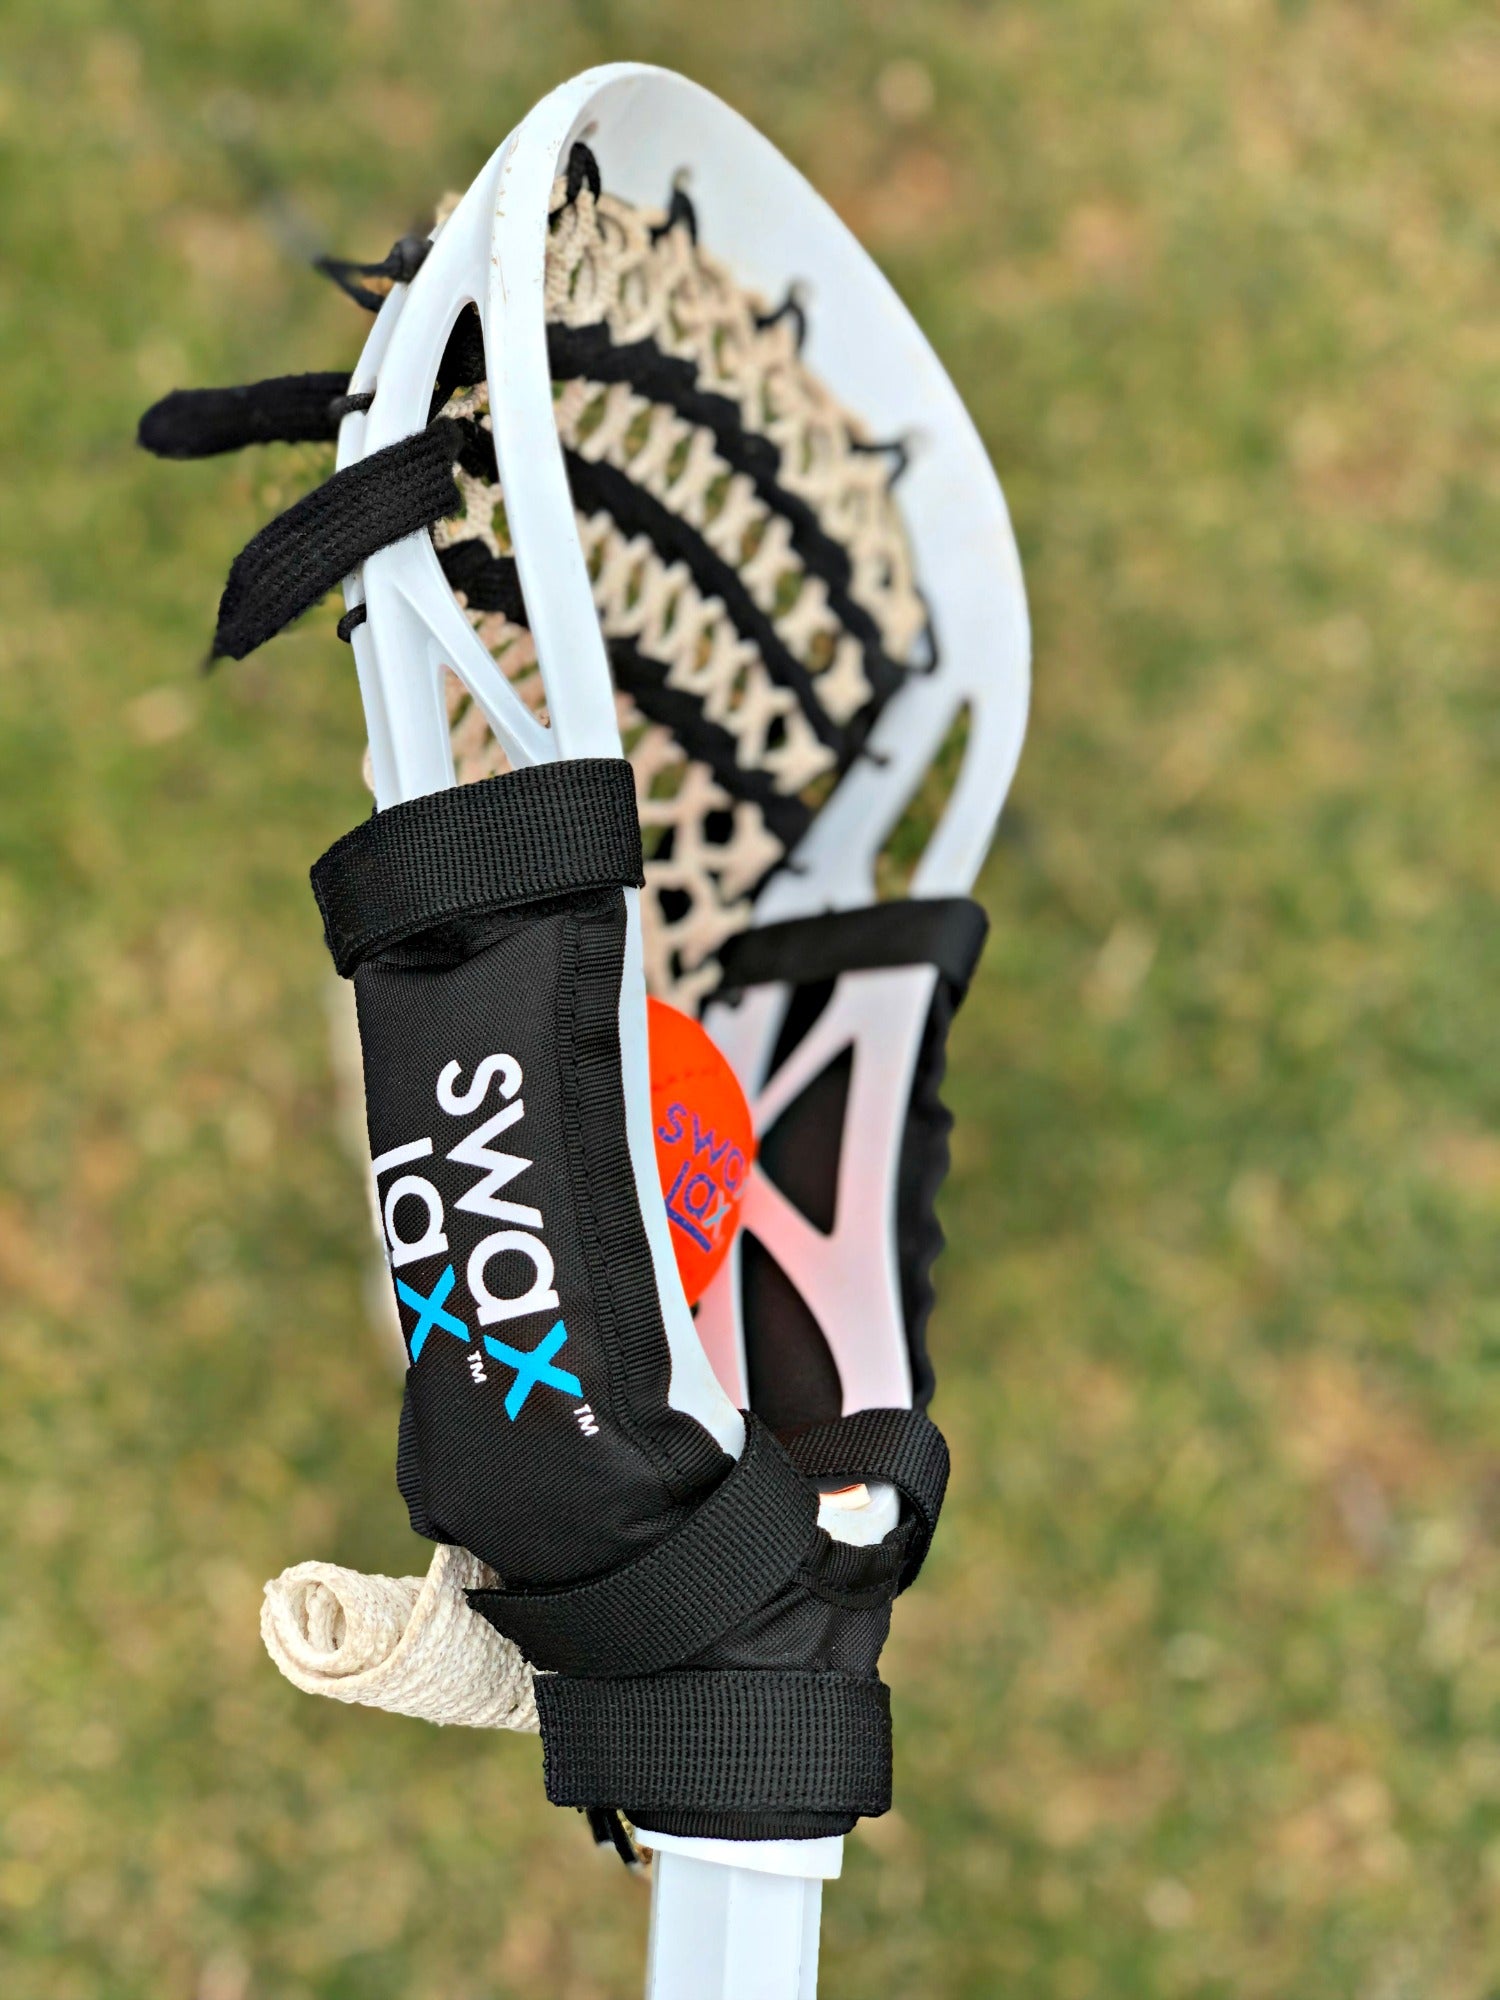 Swax Lax Power Weights shown on boy's lacrosse stick